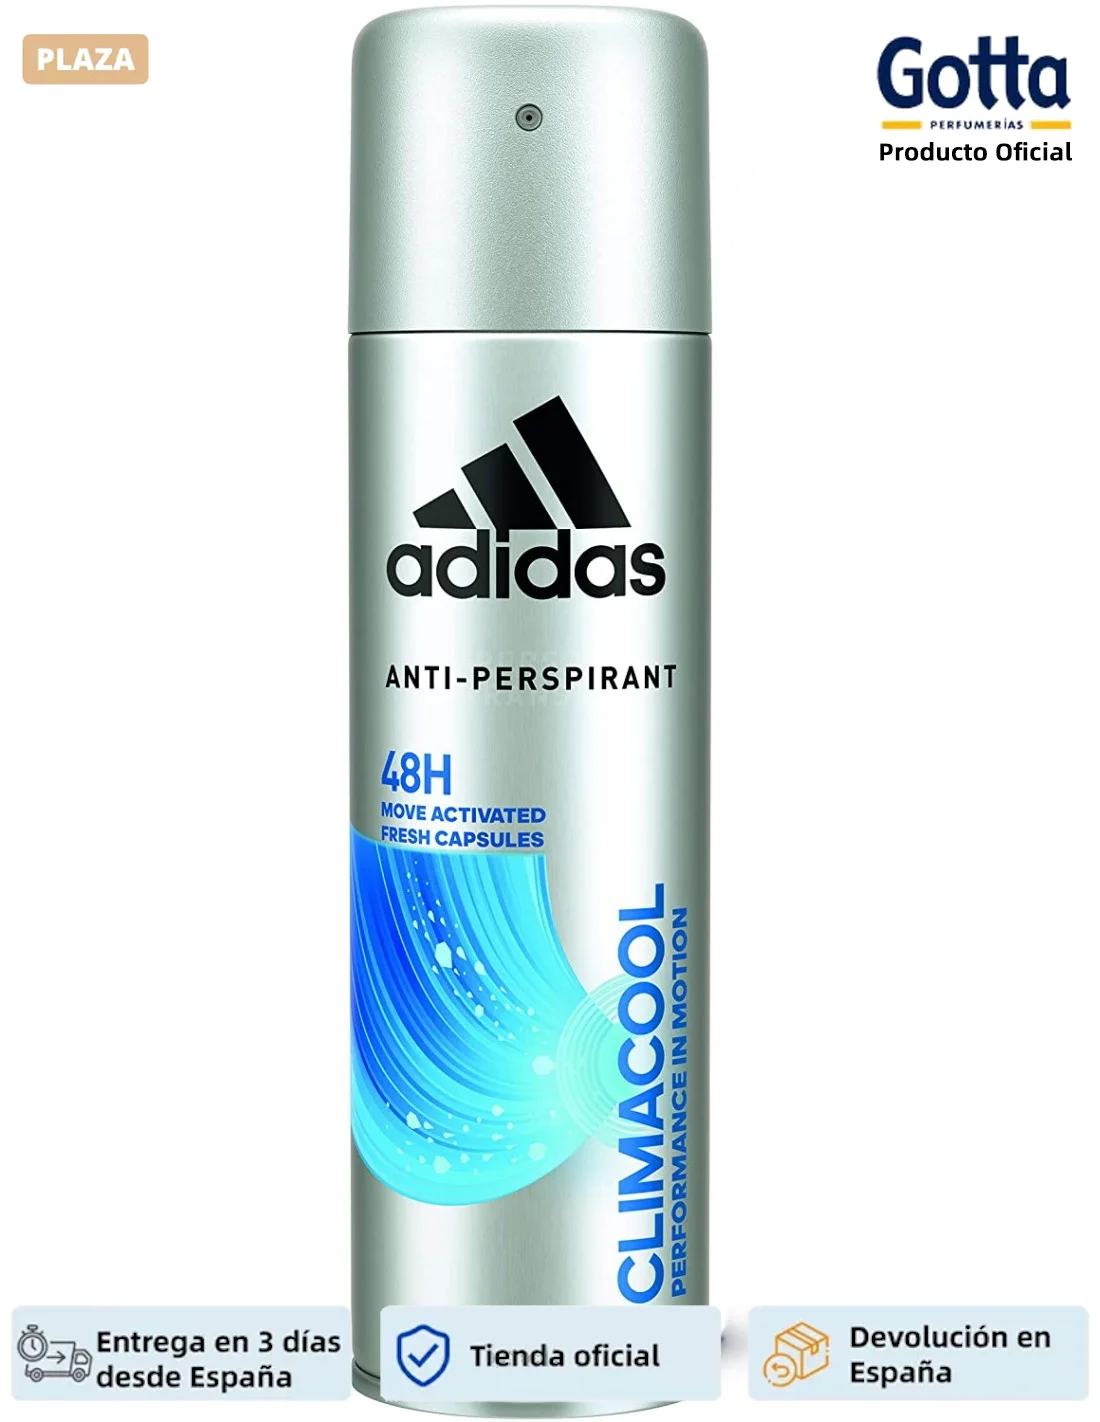 ADIDAS-CLIMACOOL SPRAY deodorant-200 ML-beauty and health, Perfumes and  deodorants, deodorants-the more you move, the more effective it is.